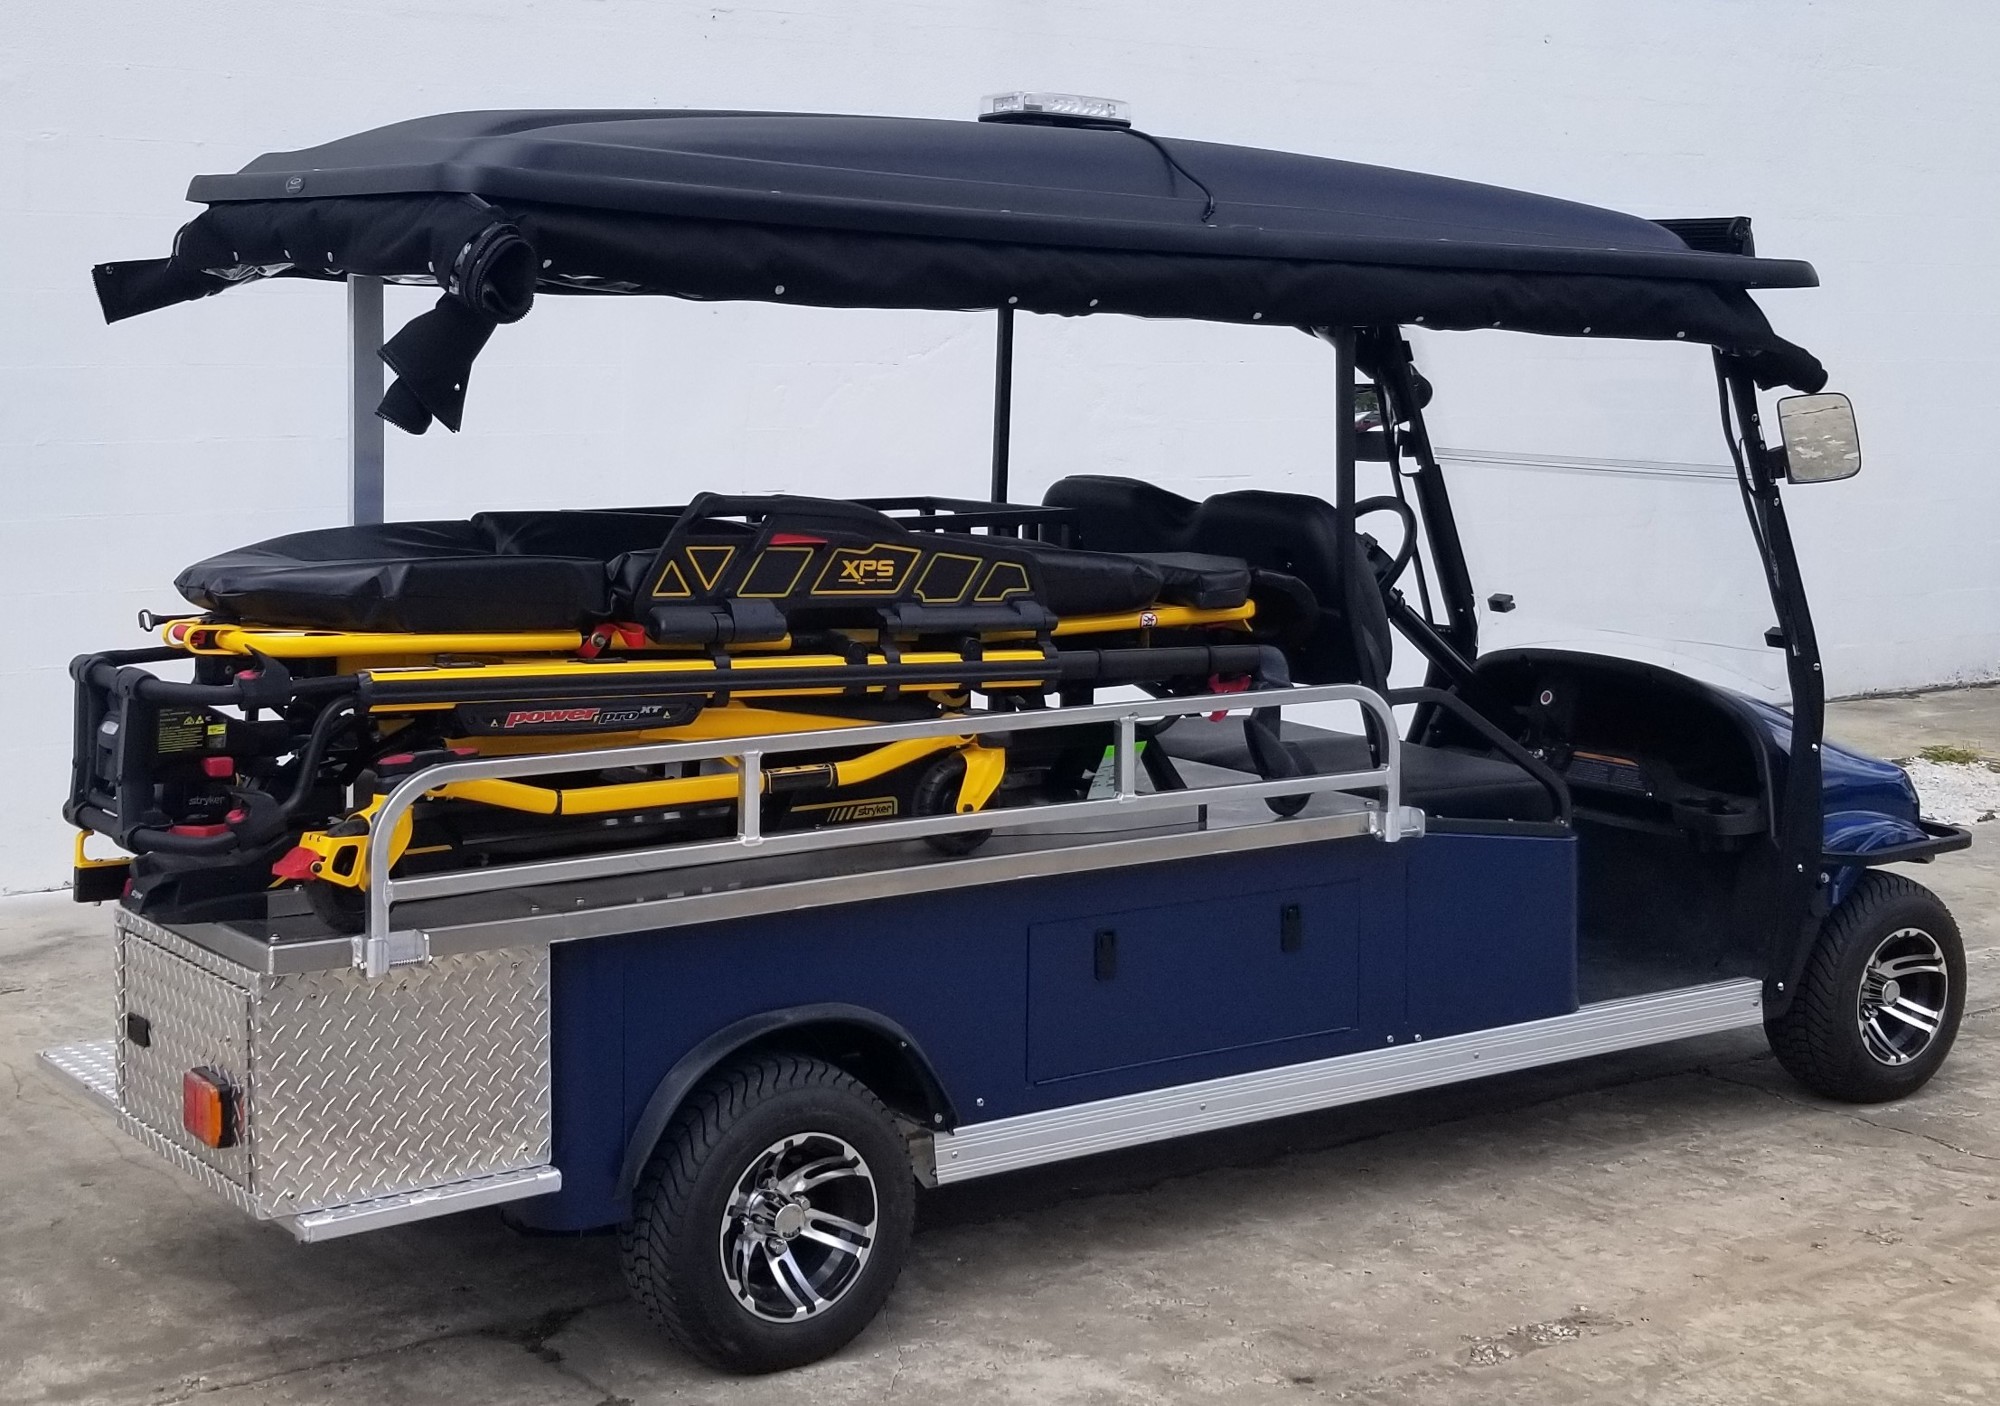 Courtesy. Light utility, low-speed vehicle manufacturer Cruise Car has seen an increase in demand lately for its medical carts.